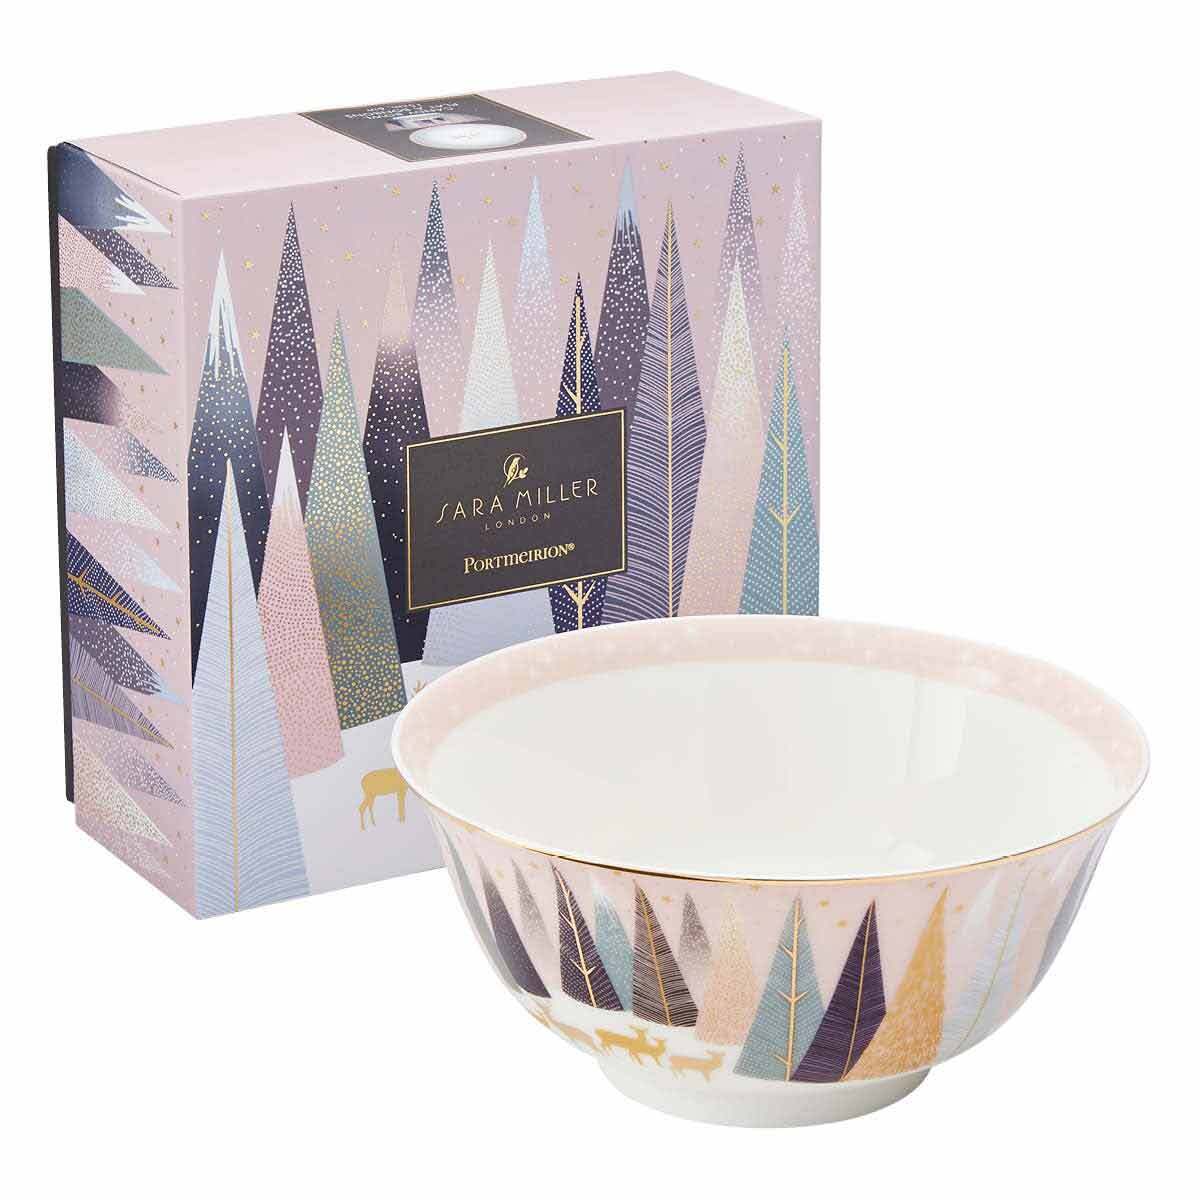 Sara Miller London for Portmeirion Frosted Pines 6 Inch Candy Bowl image number null